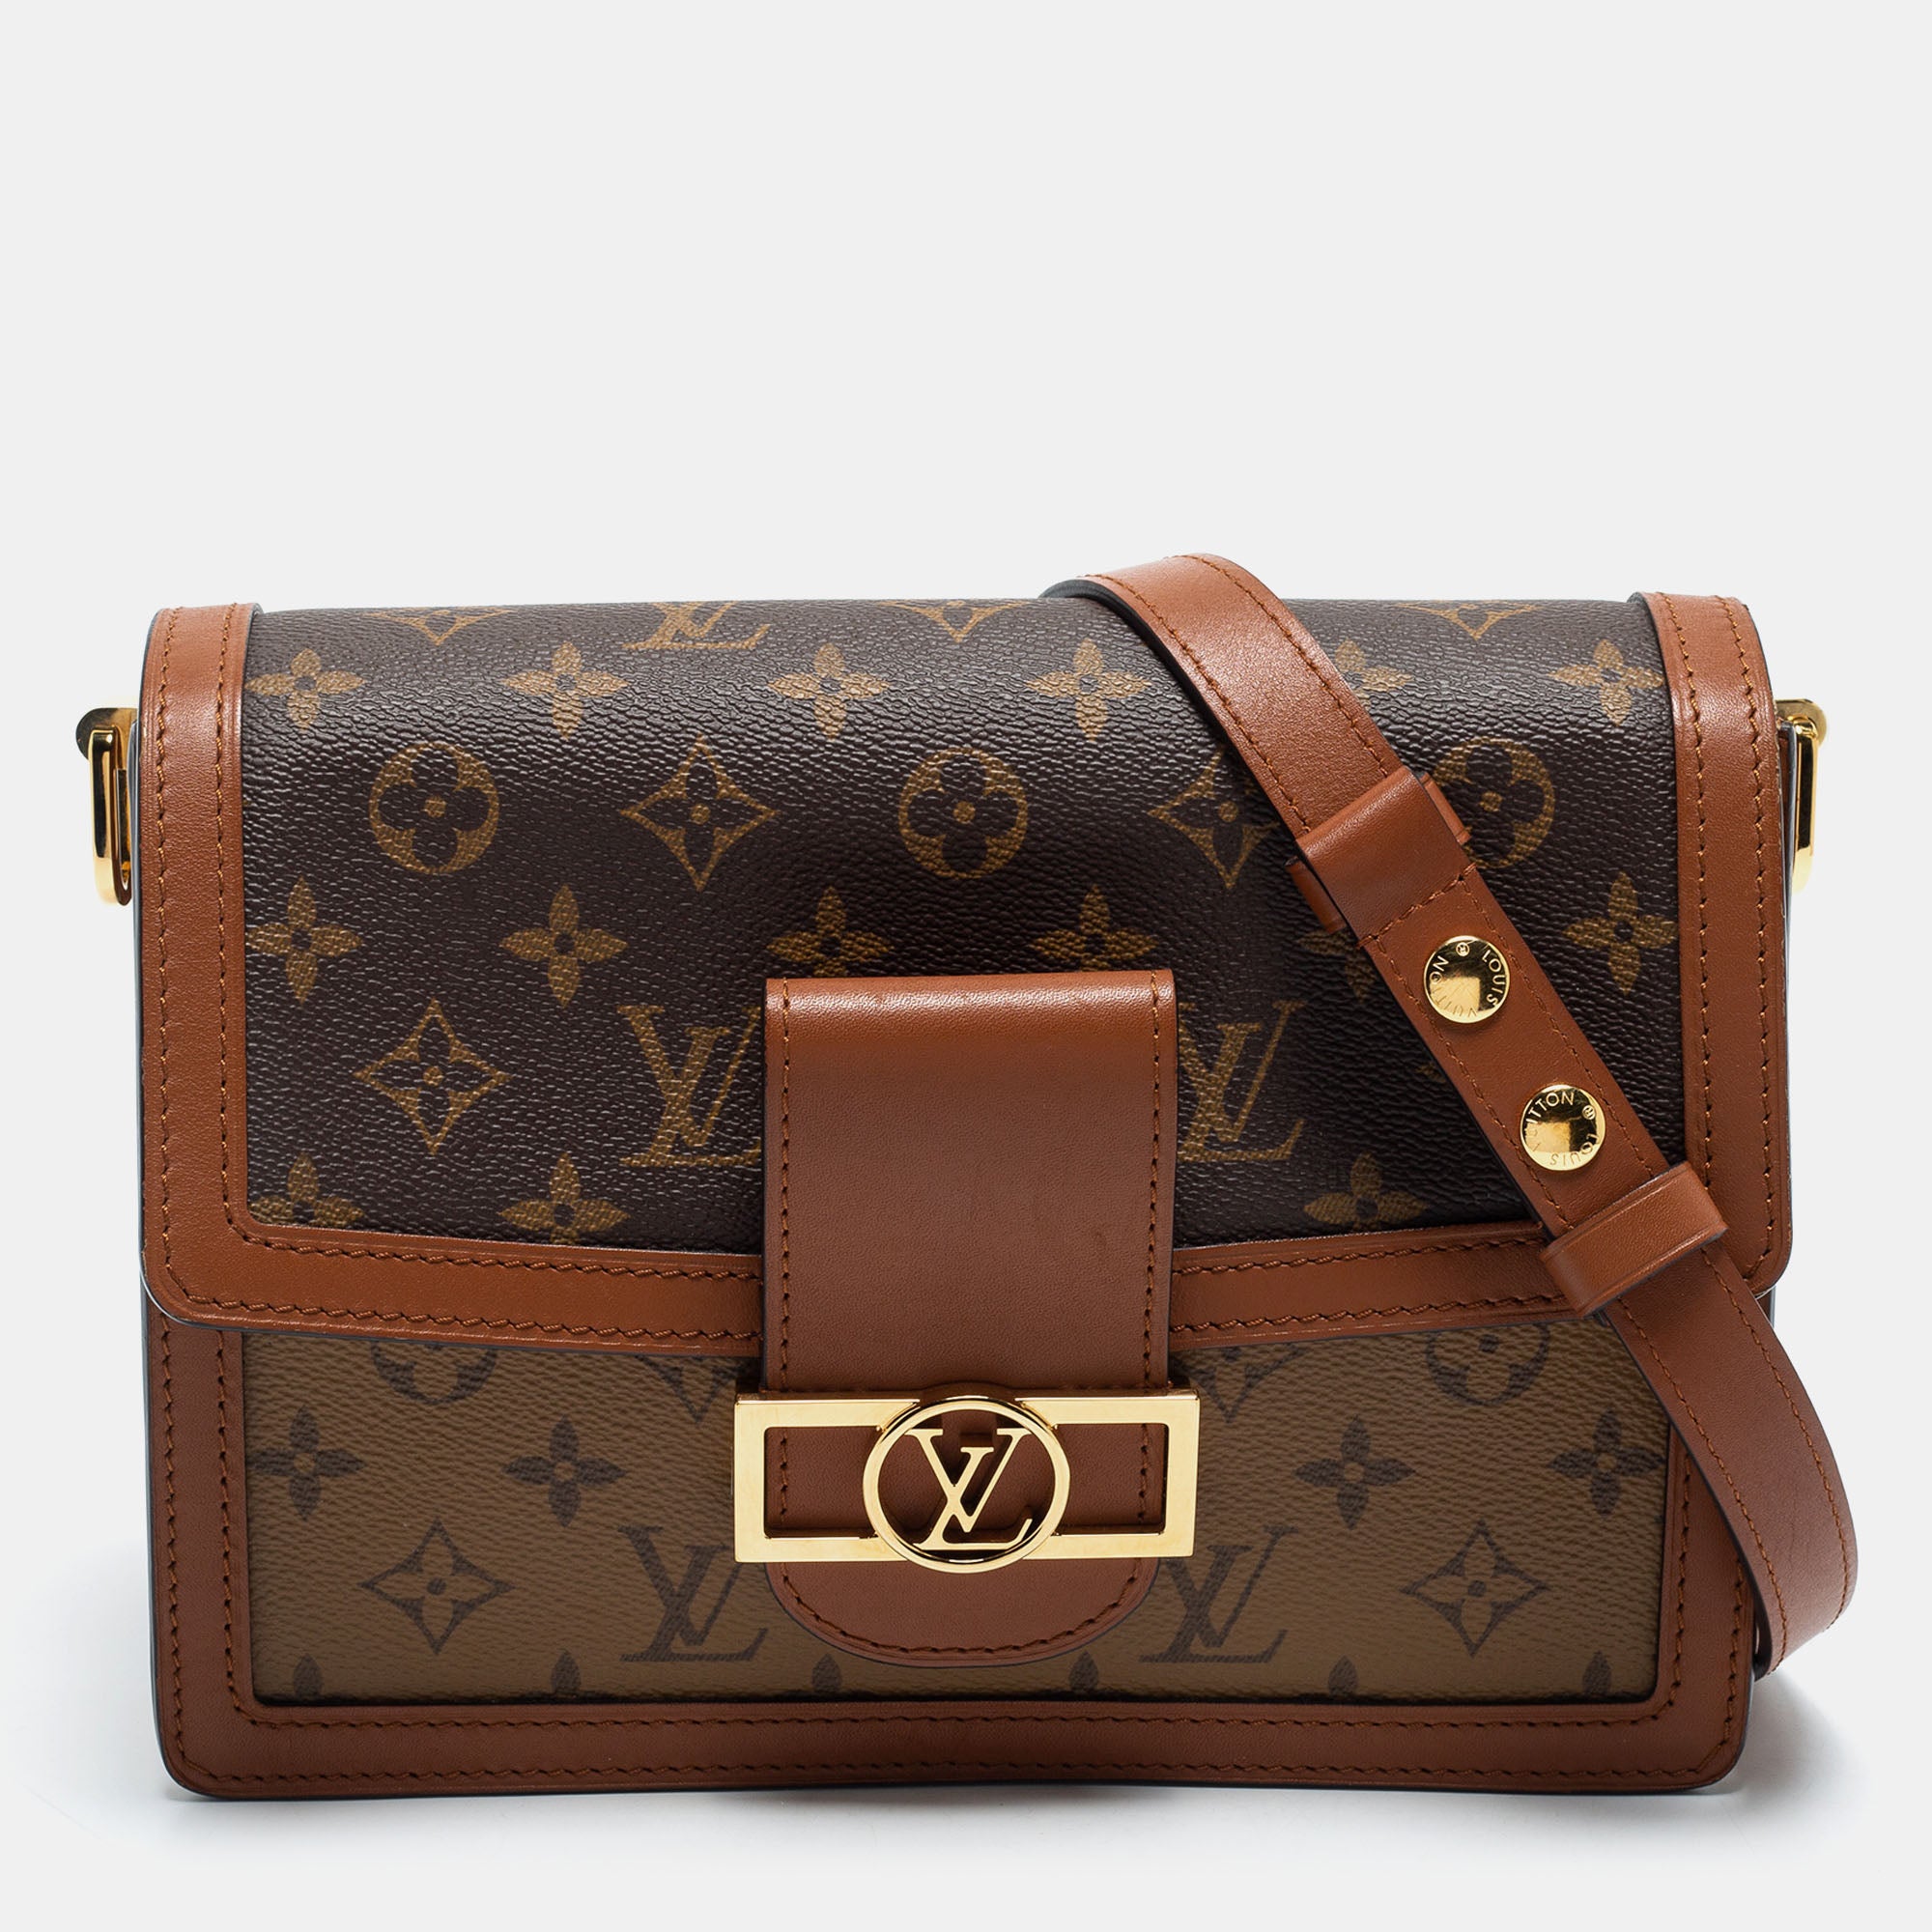 Buy LOUIS VUITTON Bumbag Dauphine Monogram Reverse M44586 Body Bag Monogram  Reverse Brown / 450086 [Used] from Japan - Buy authentic Plus exclusive  items from Japan